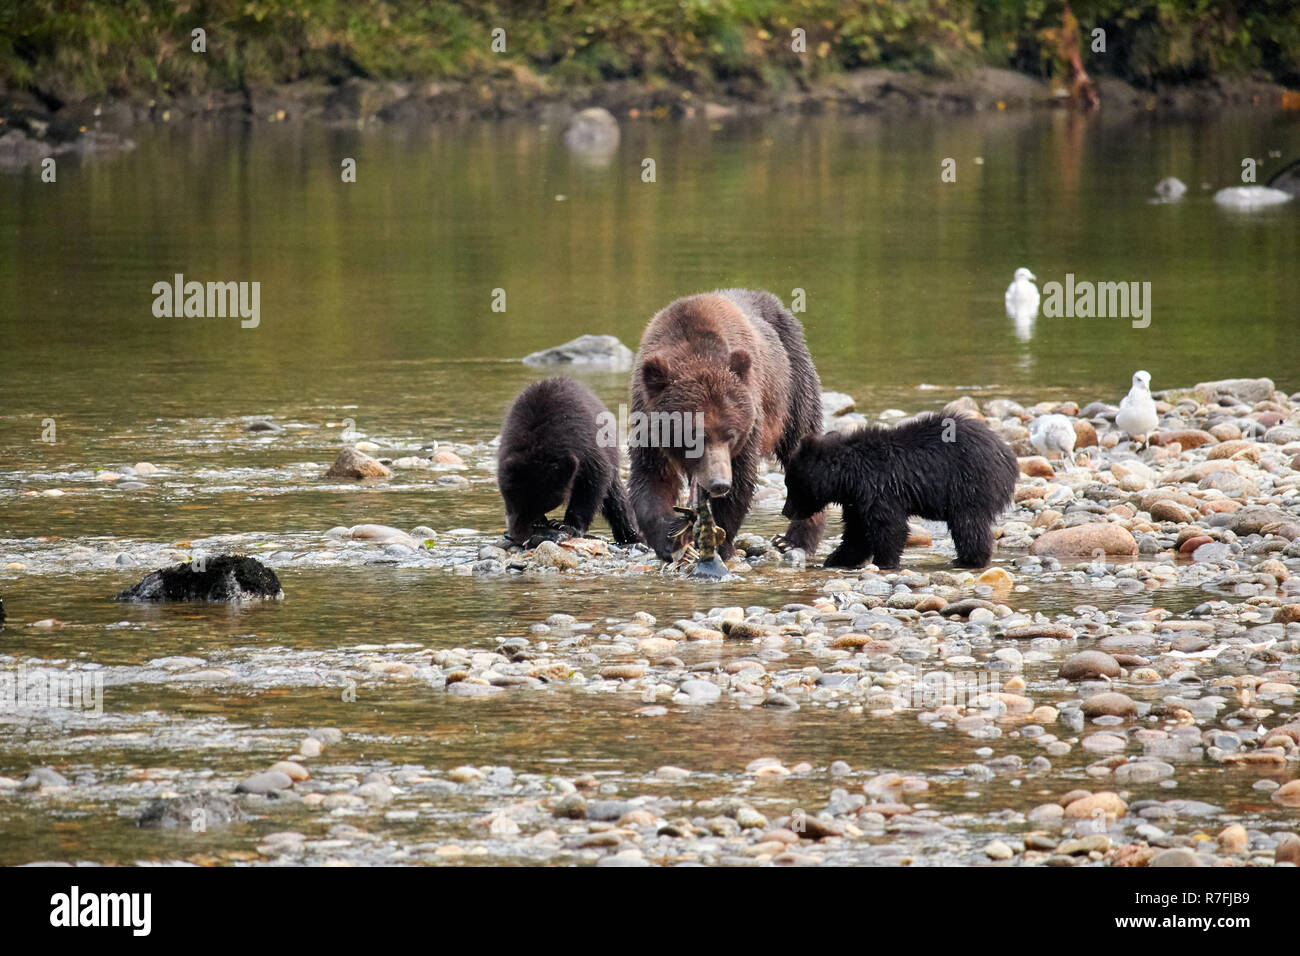 Grizzly bear sow and cubs eating salmon, Great Bear Rainforest, Canada Stock Photo